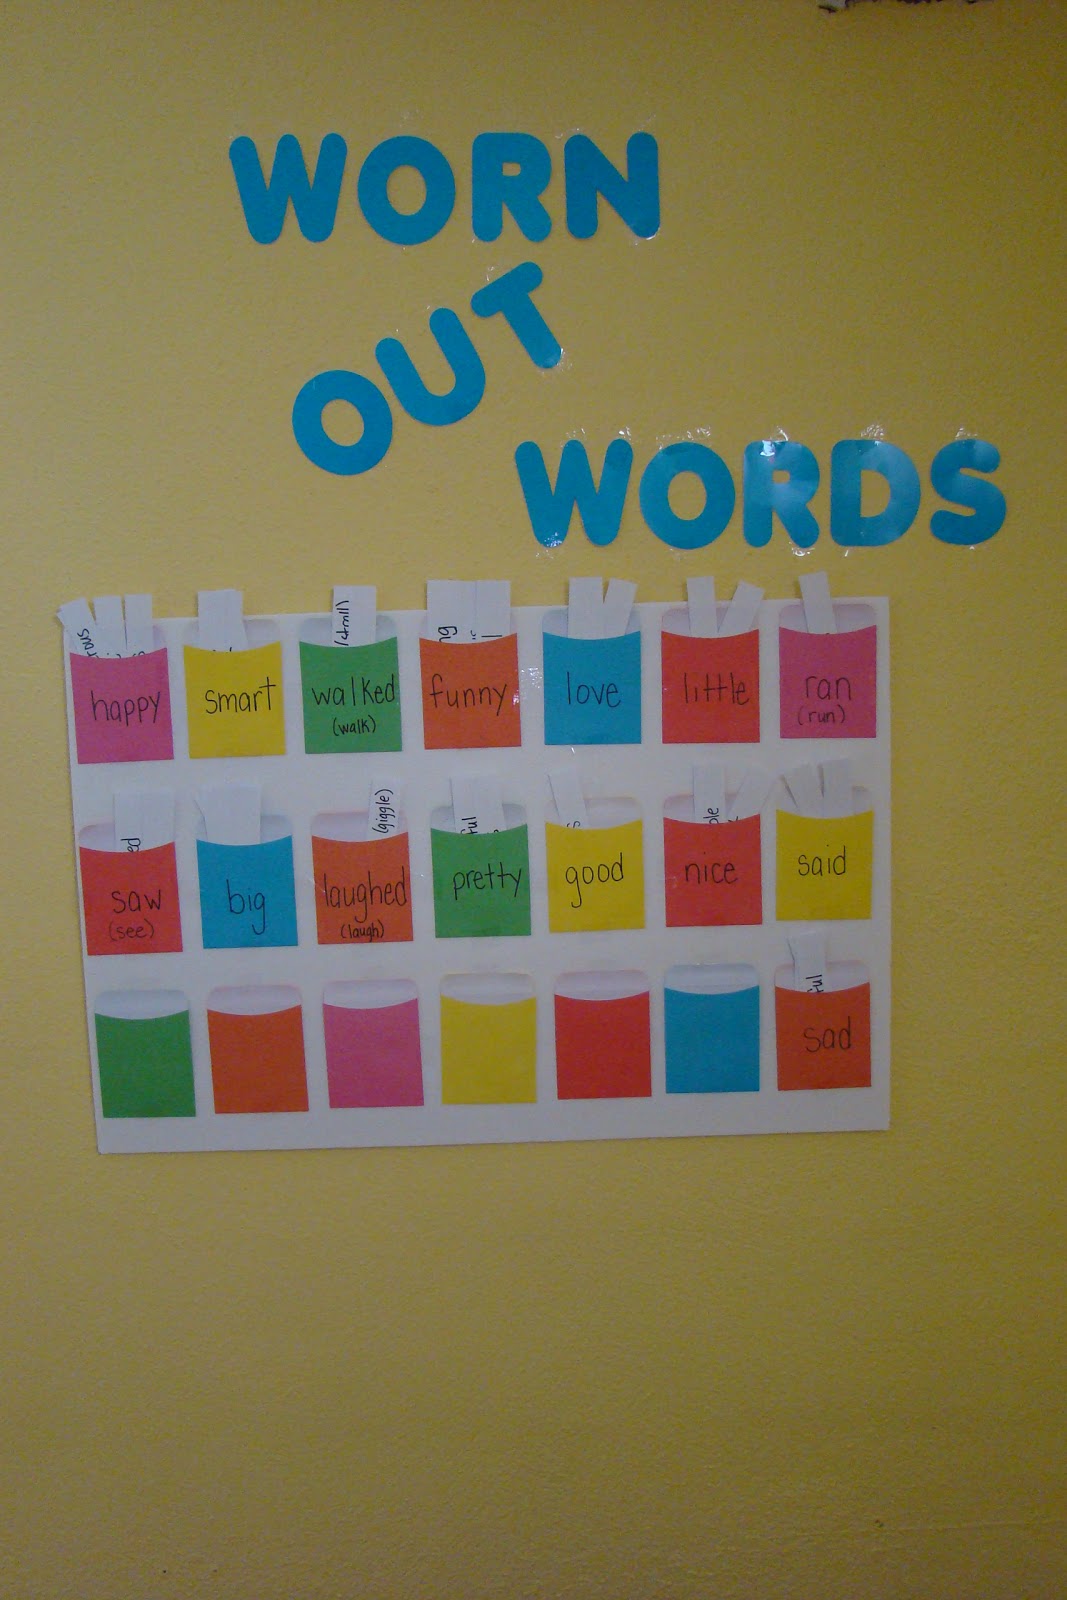 Worn Out Words